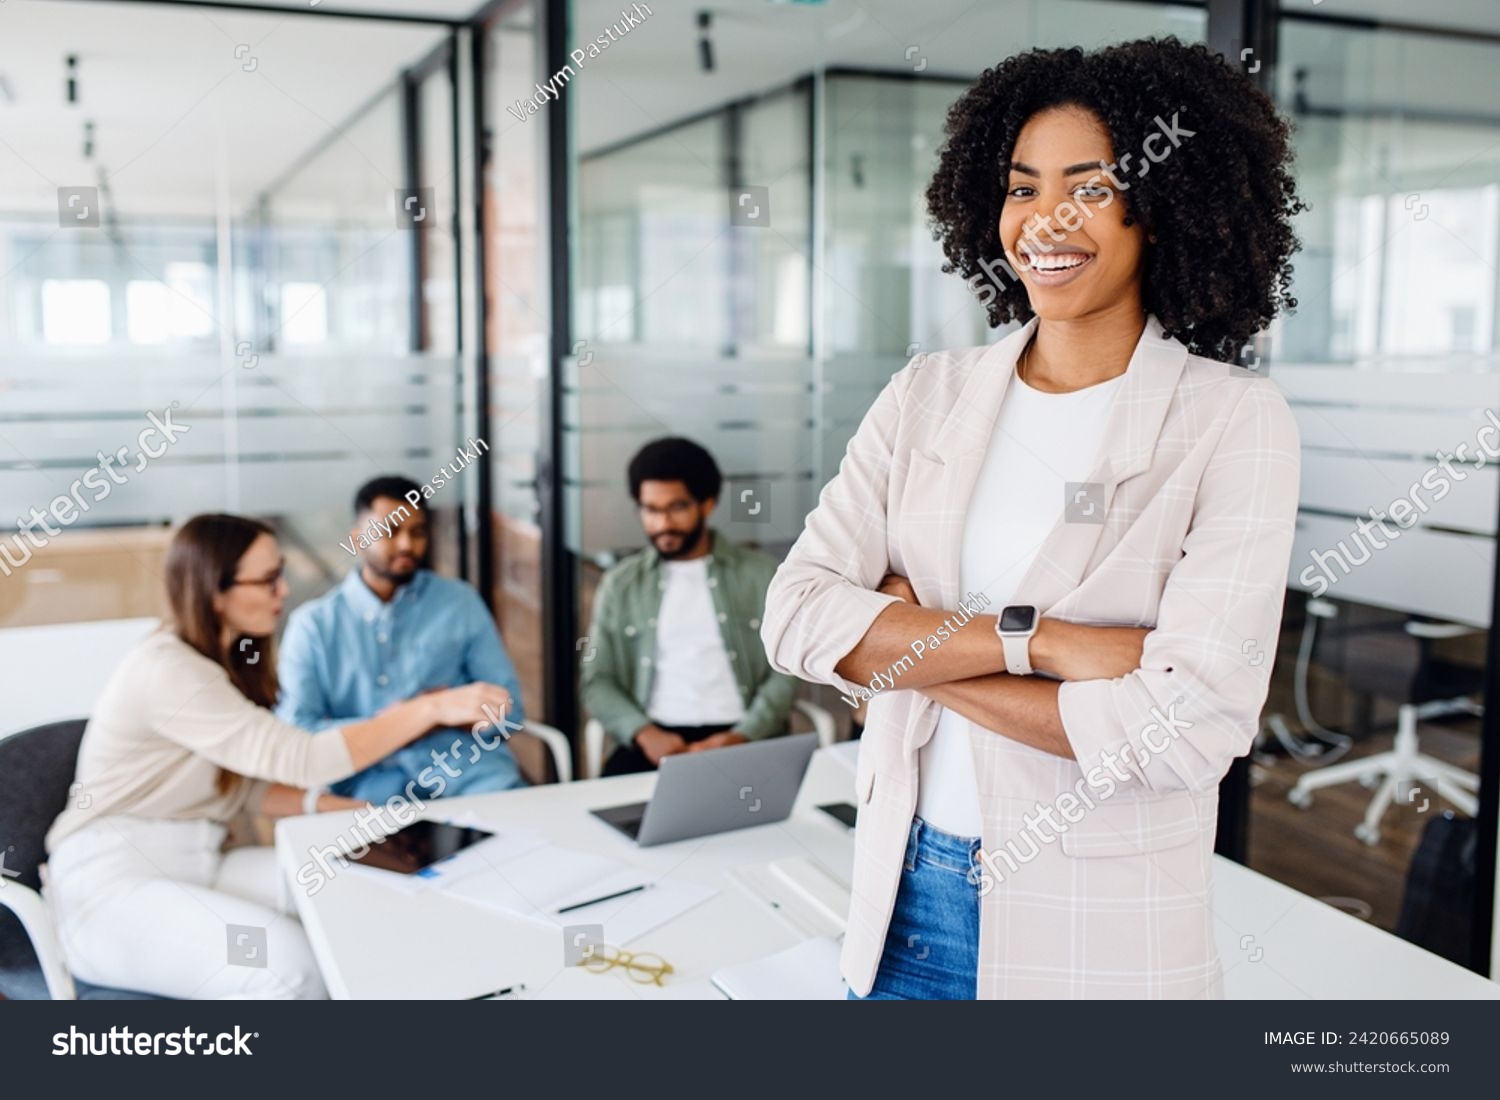 Smart high-skilled young Brazilian woman with a cheerful smile stands with arms crossed on the forefront in a modern office setting with her colleagues collaborating in the background, team synergy #2420665089